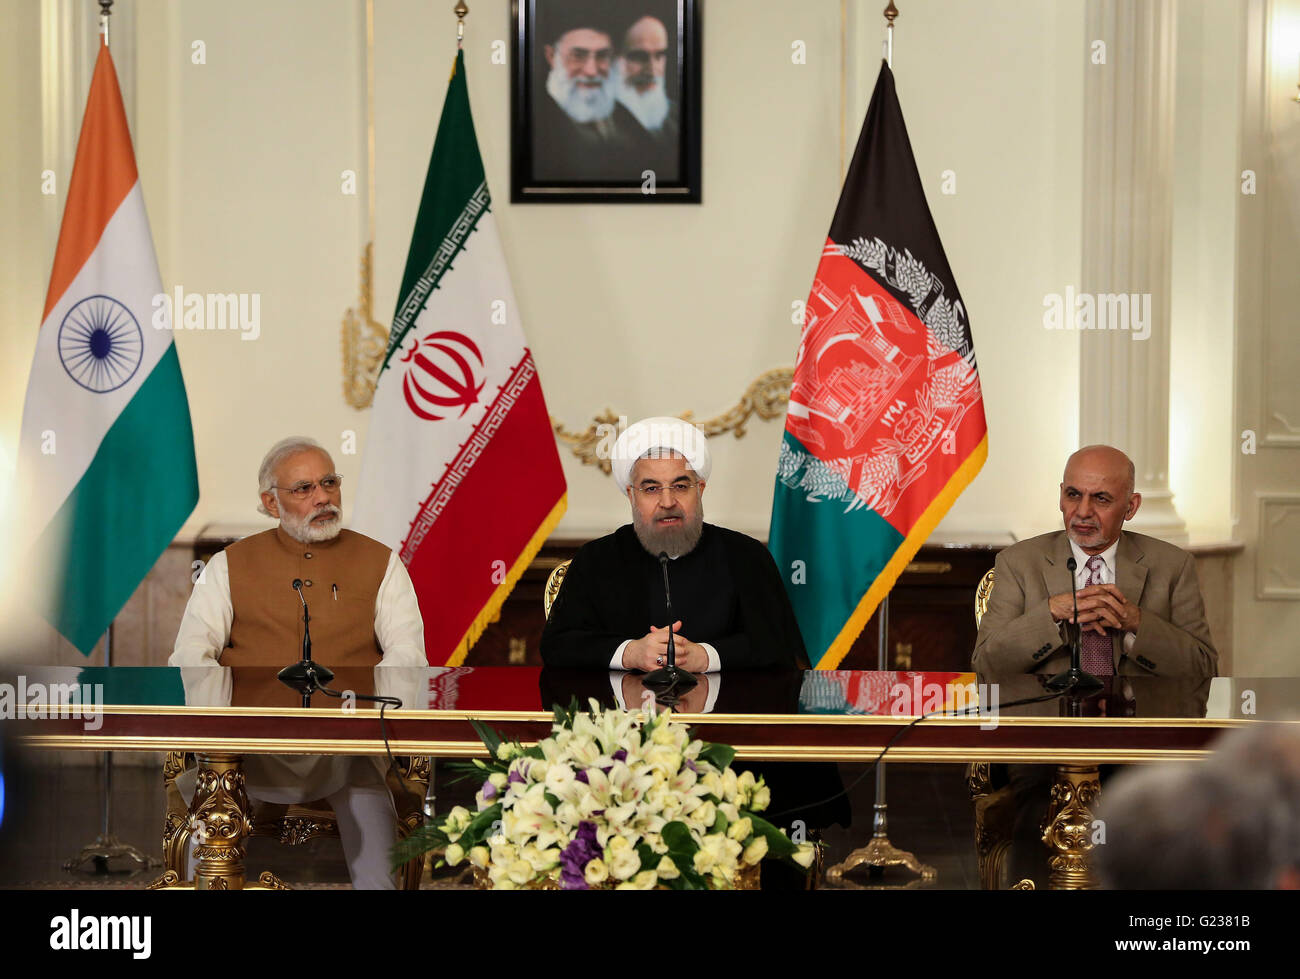 (160524) -- TEHRAN, May 24, 2016 (Xinhua) -- (From L to R) Indian Prime Minister Narendra Modi, Iranian President Hassan Rouhani and Afghan President Ashraf Ghani attend a meeting at Saadabad Palace in Tehran, Iran, on May 23, 2016. Iran, India and Afghanistan signed a trilateral deal here on Monday to boost their regional trade and economic cooperation. The agreement, signed in the presence of Iranian President Hassan Rouhani, Indian Prime Minister Narendra Modi and Afghan President Ashraf Ghani, is to develop Iran's Chabahar port, which would serve as a transit route connecting the three cou Stock Photo